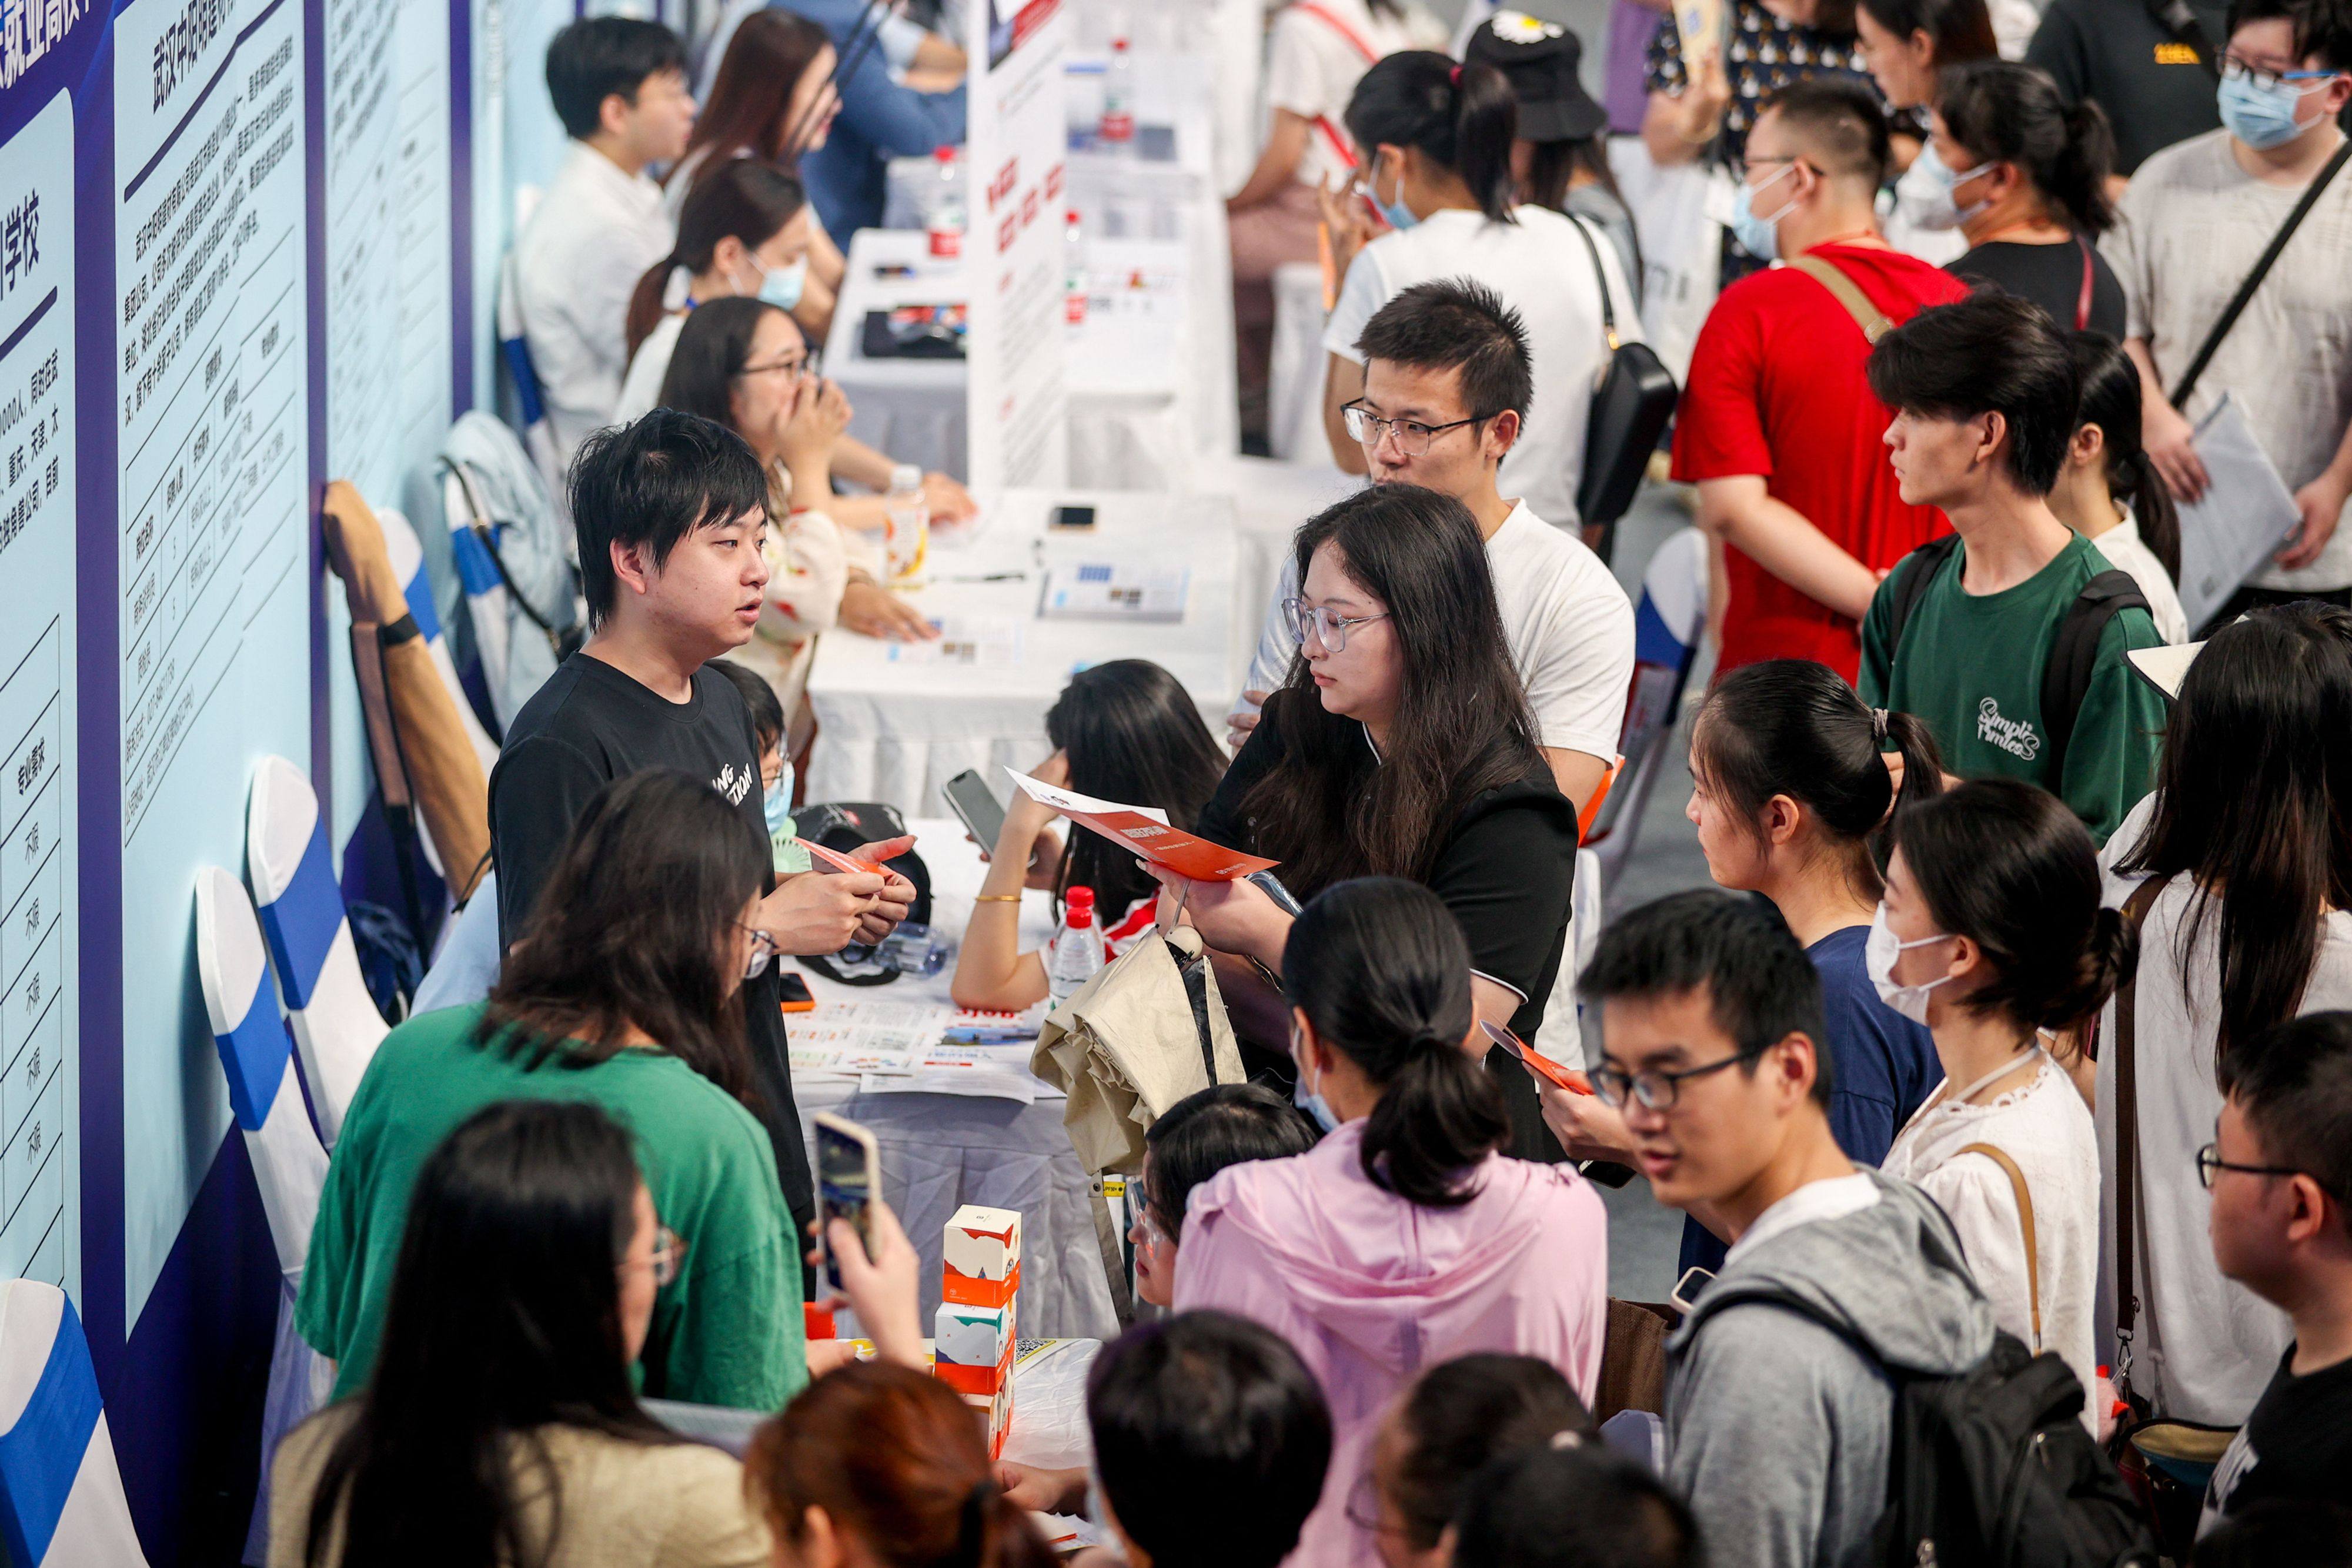 University graduates attend a job fair in Wuhan, in China’s central Hubei province on August 10. Photo: AFP